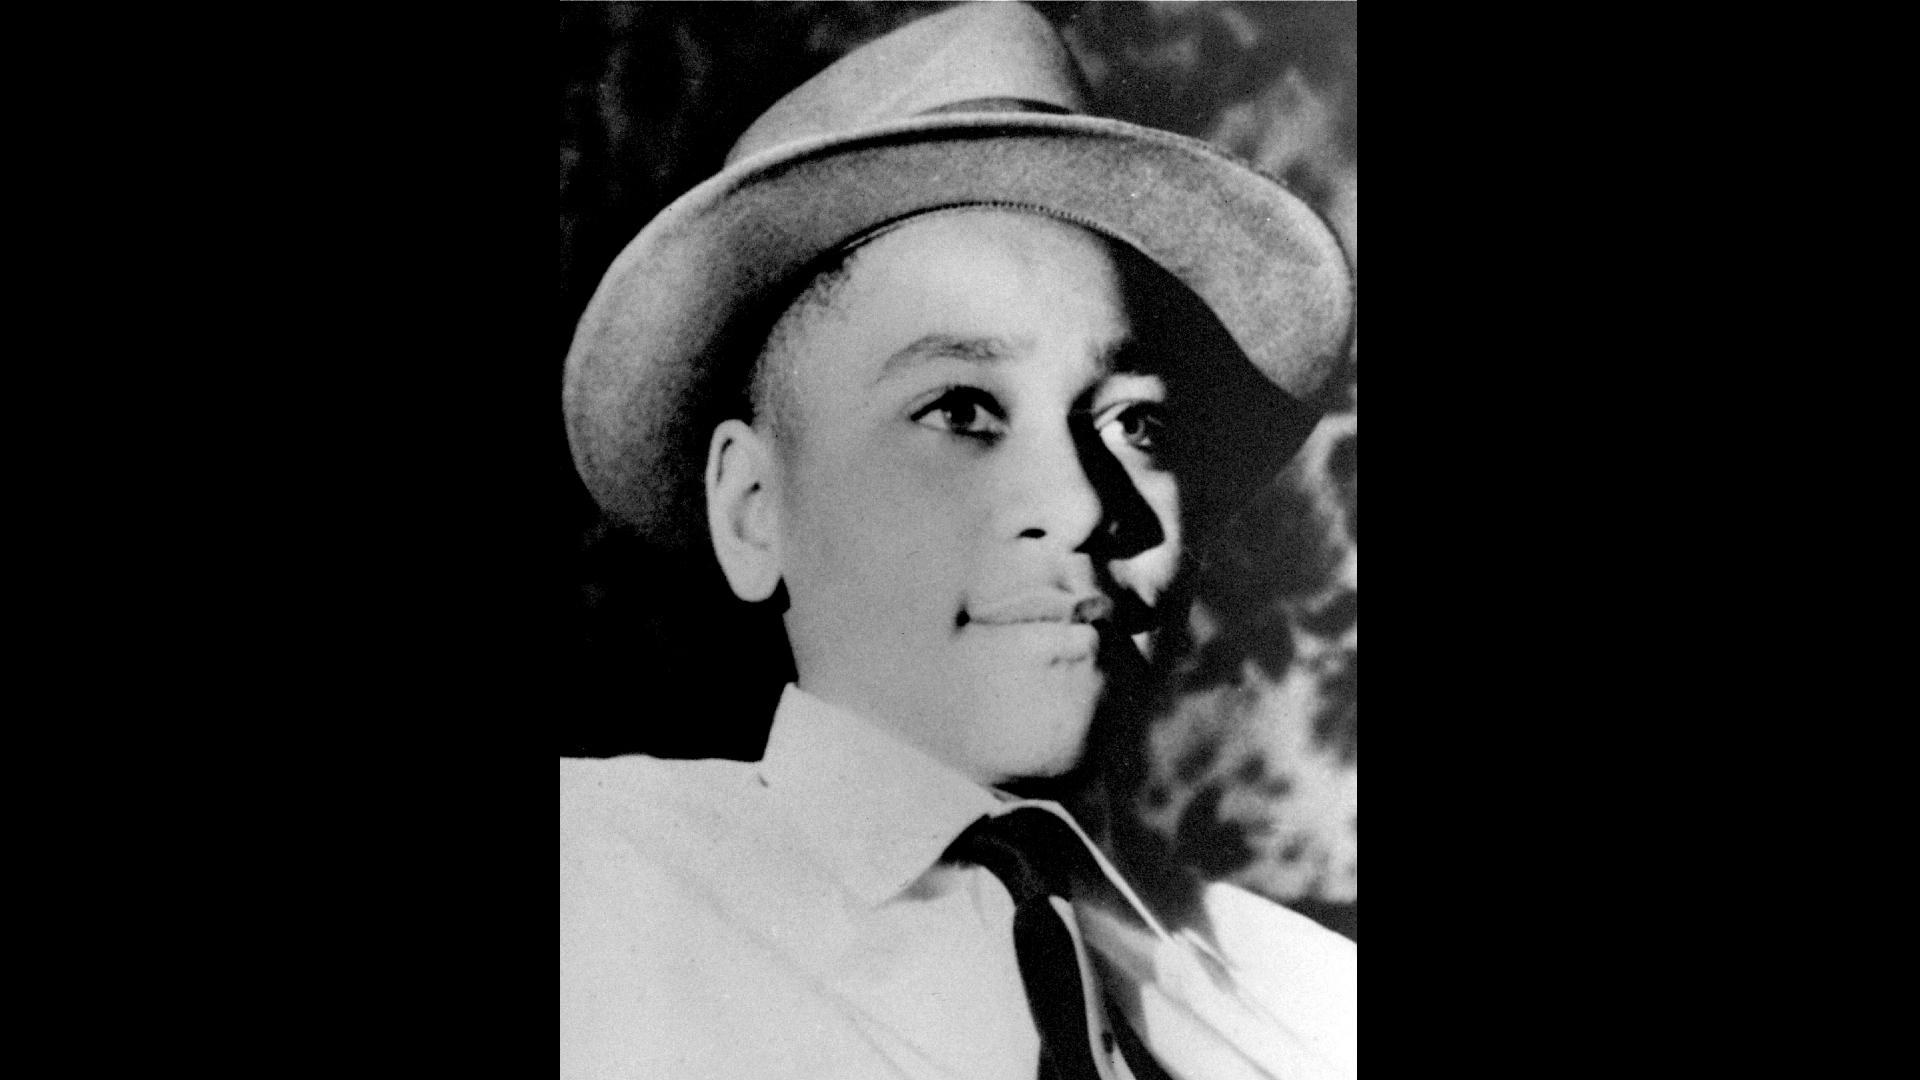 This undated photo shows Emmett Louis Till, a 14-year-old black Chicago boy, who was kidnapped, tortured and murdered in 1955 after he allegedly whistled at a white woman in Mississippi. (AP Photo, File)